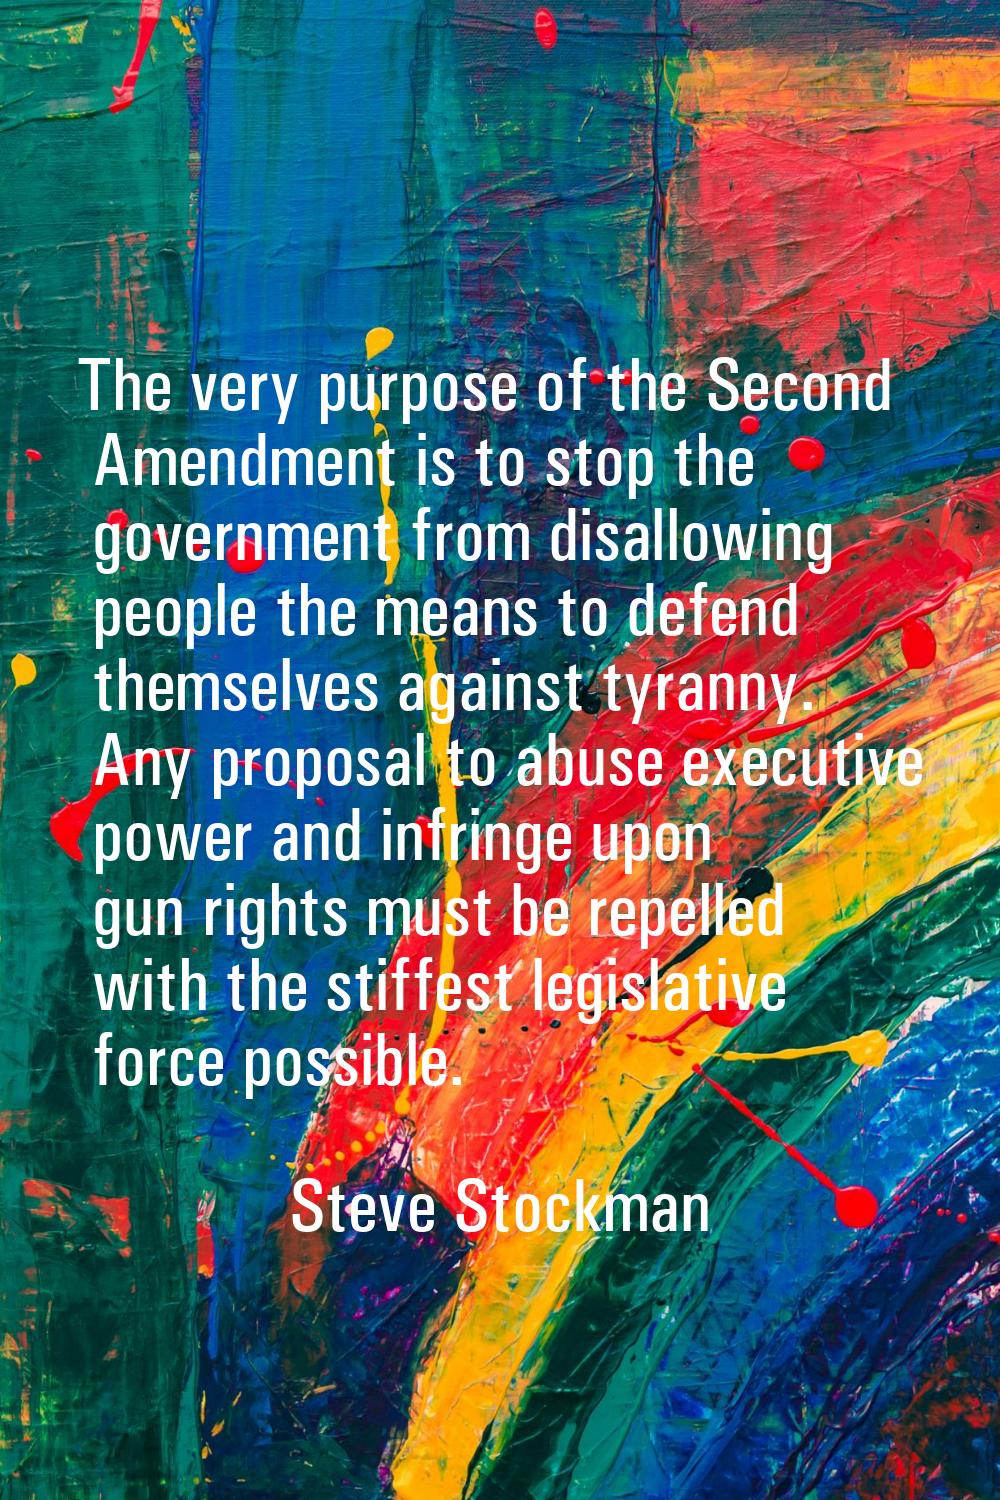 The very purpose of the Second Amendment is to stop the government from disallowing people the mean